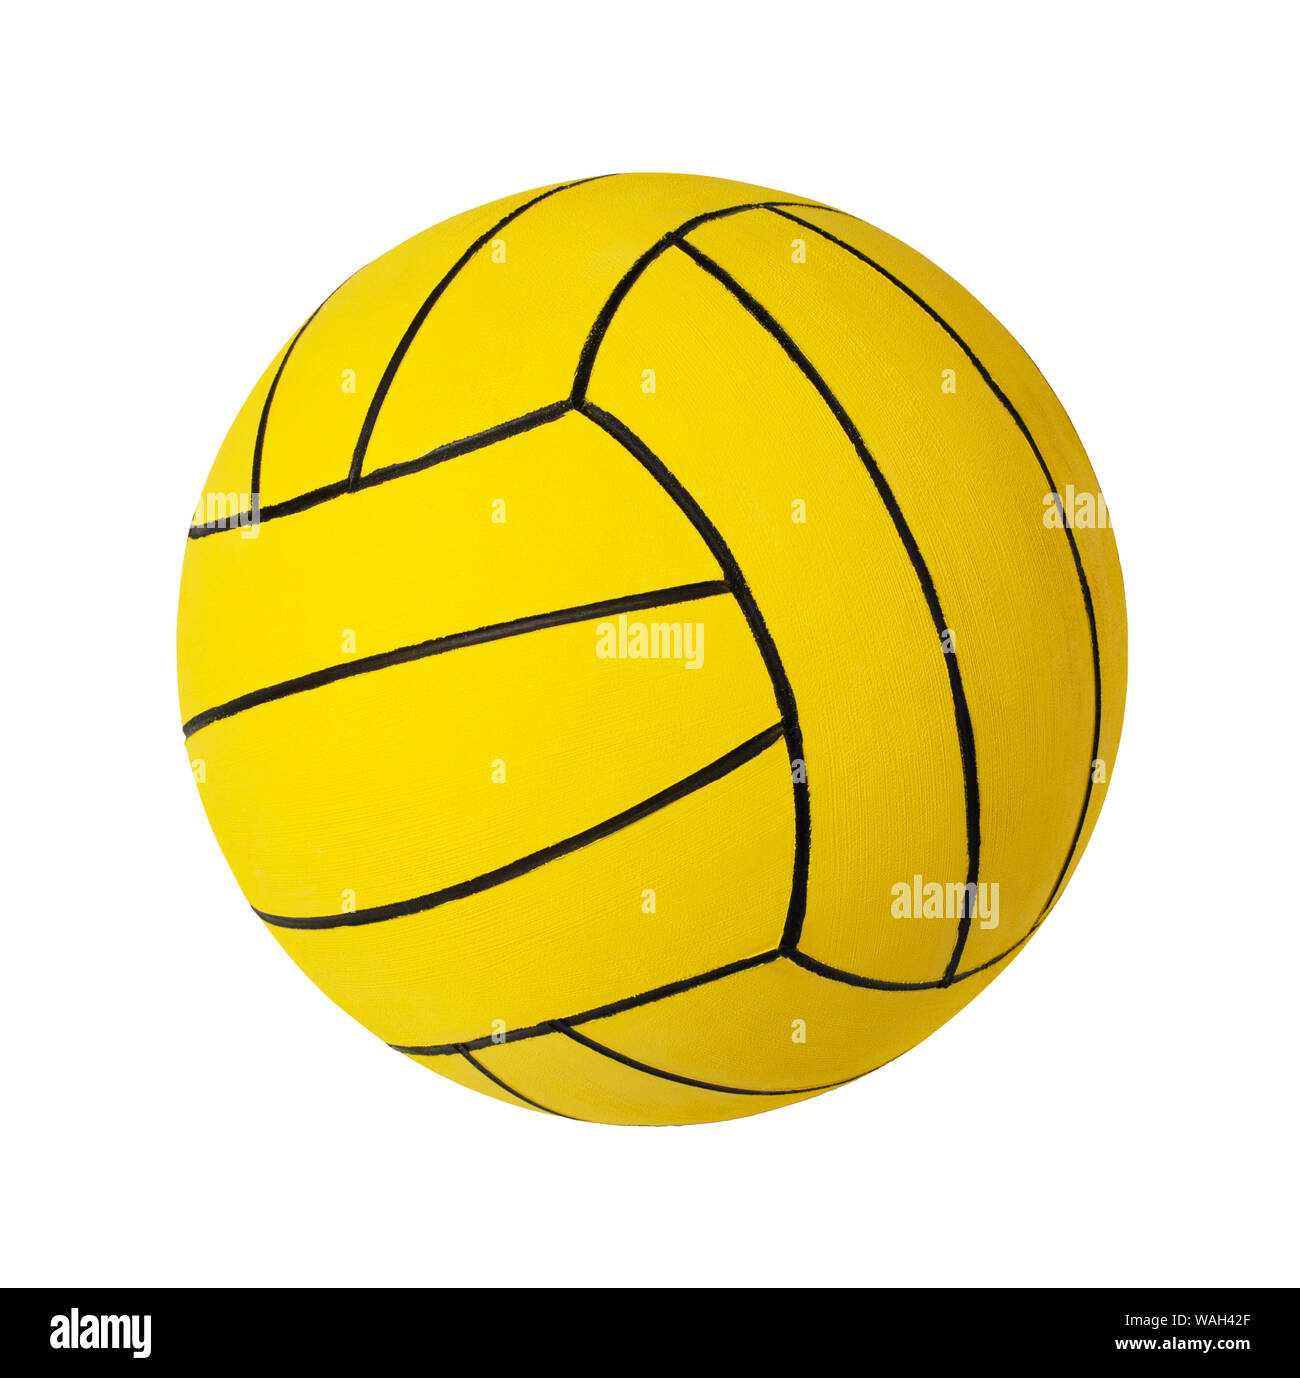 Water Polo Ball Isolated on White Background Stock Photo - Alamy